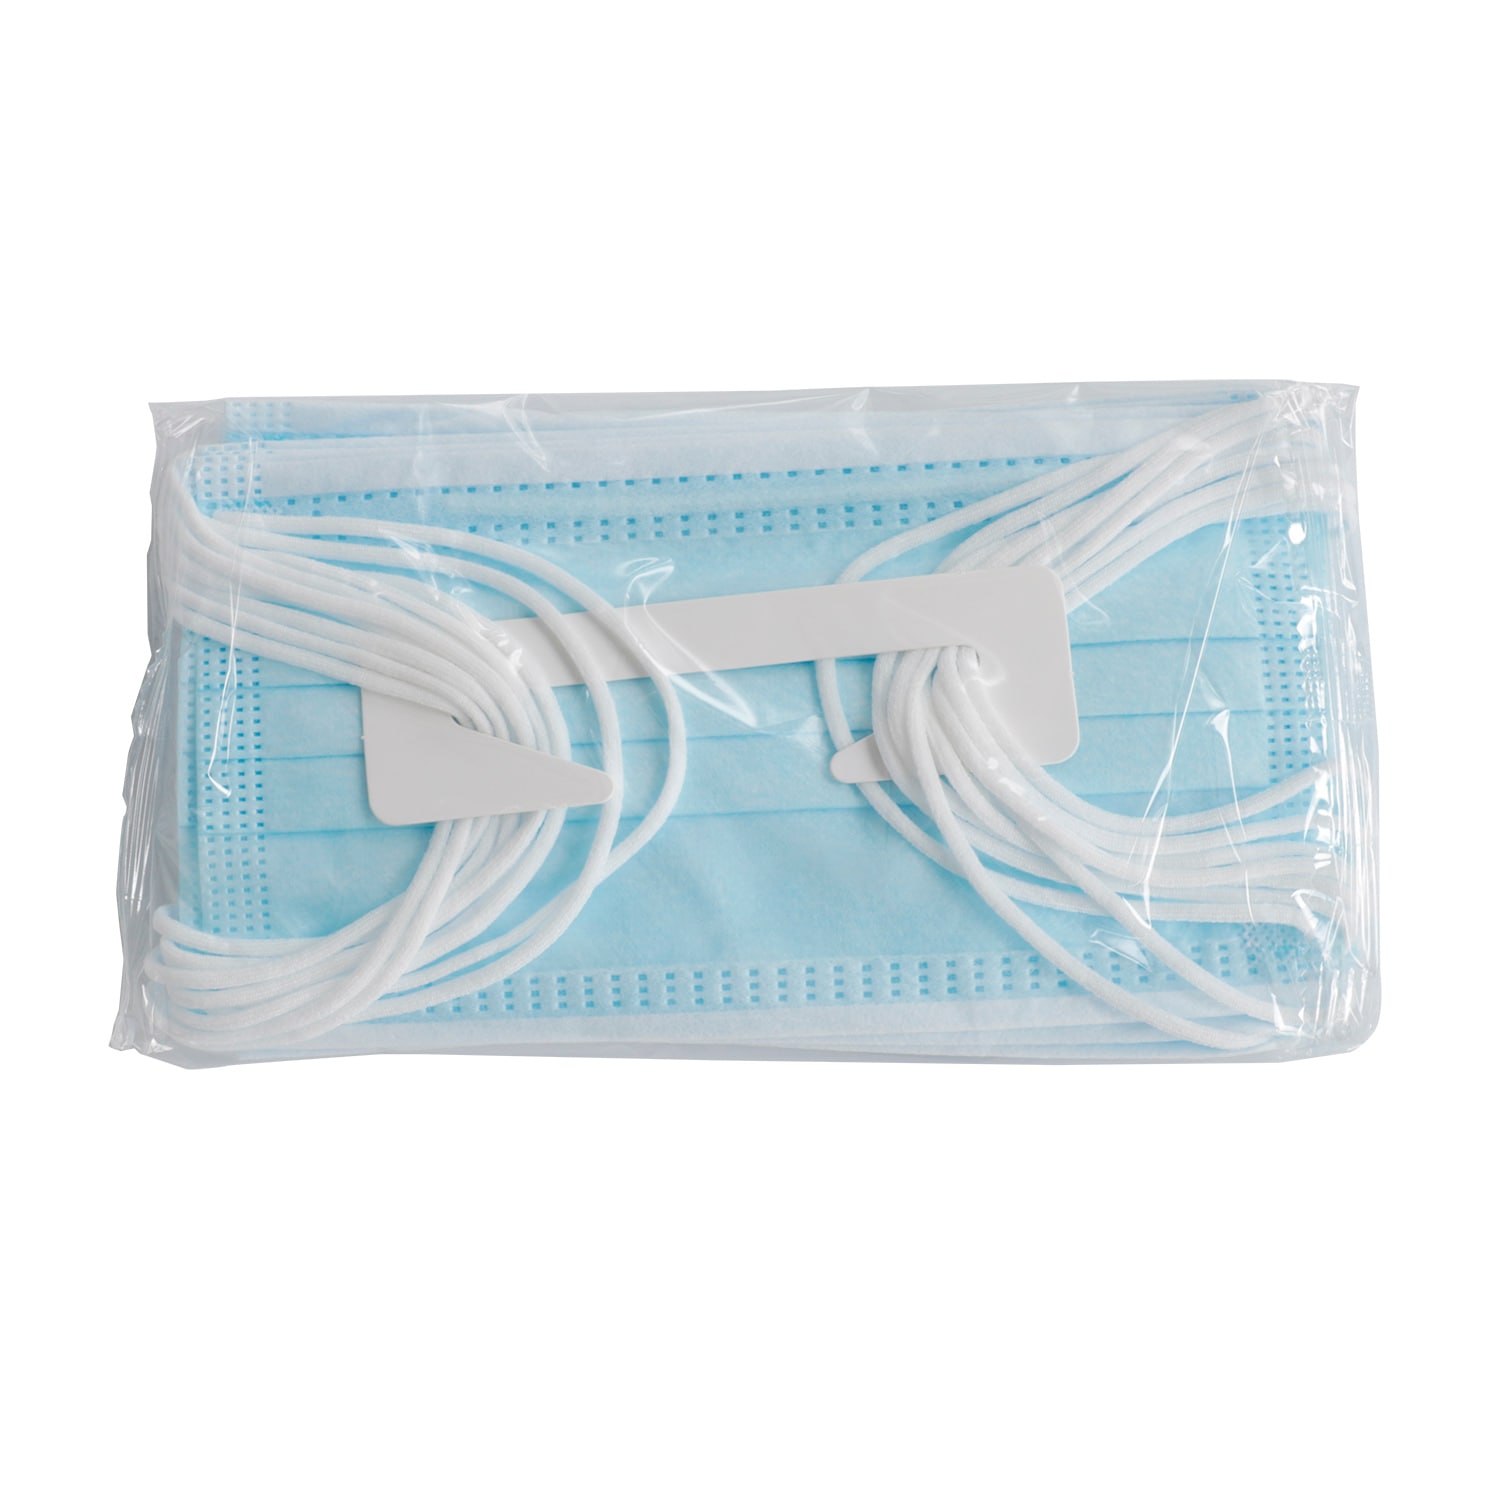 Netplay 3 Ply Surgical Face Mask 10 pcs